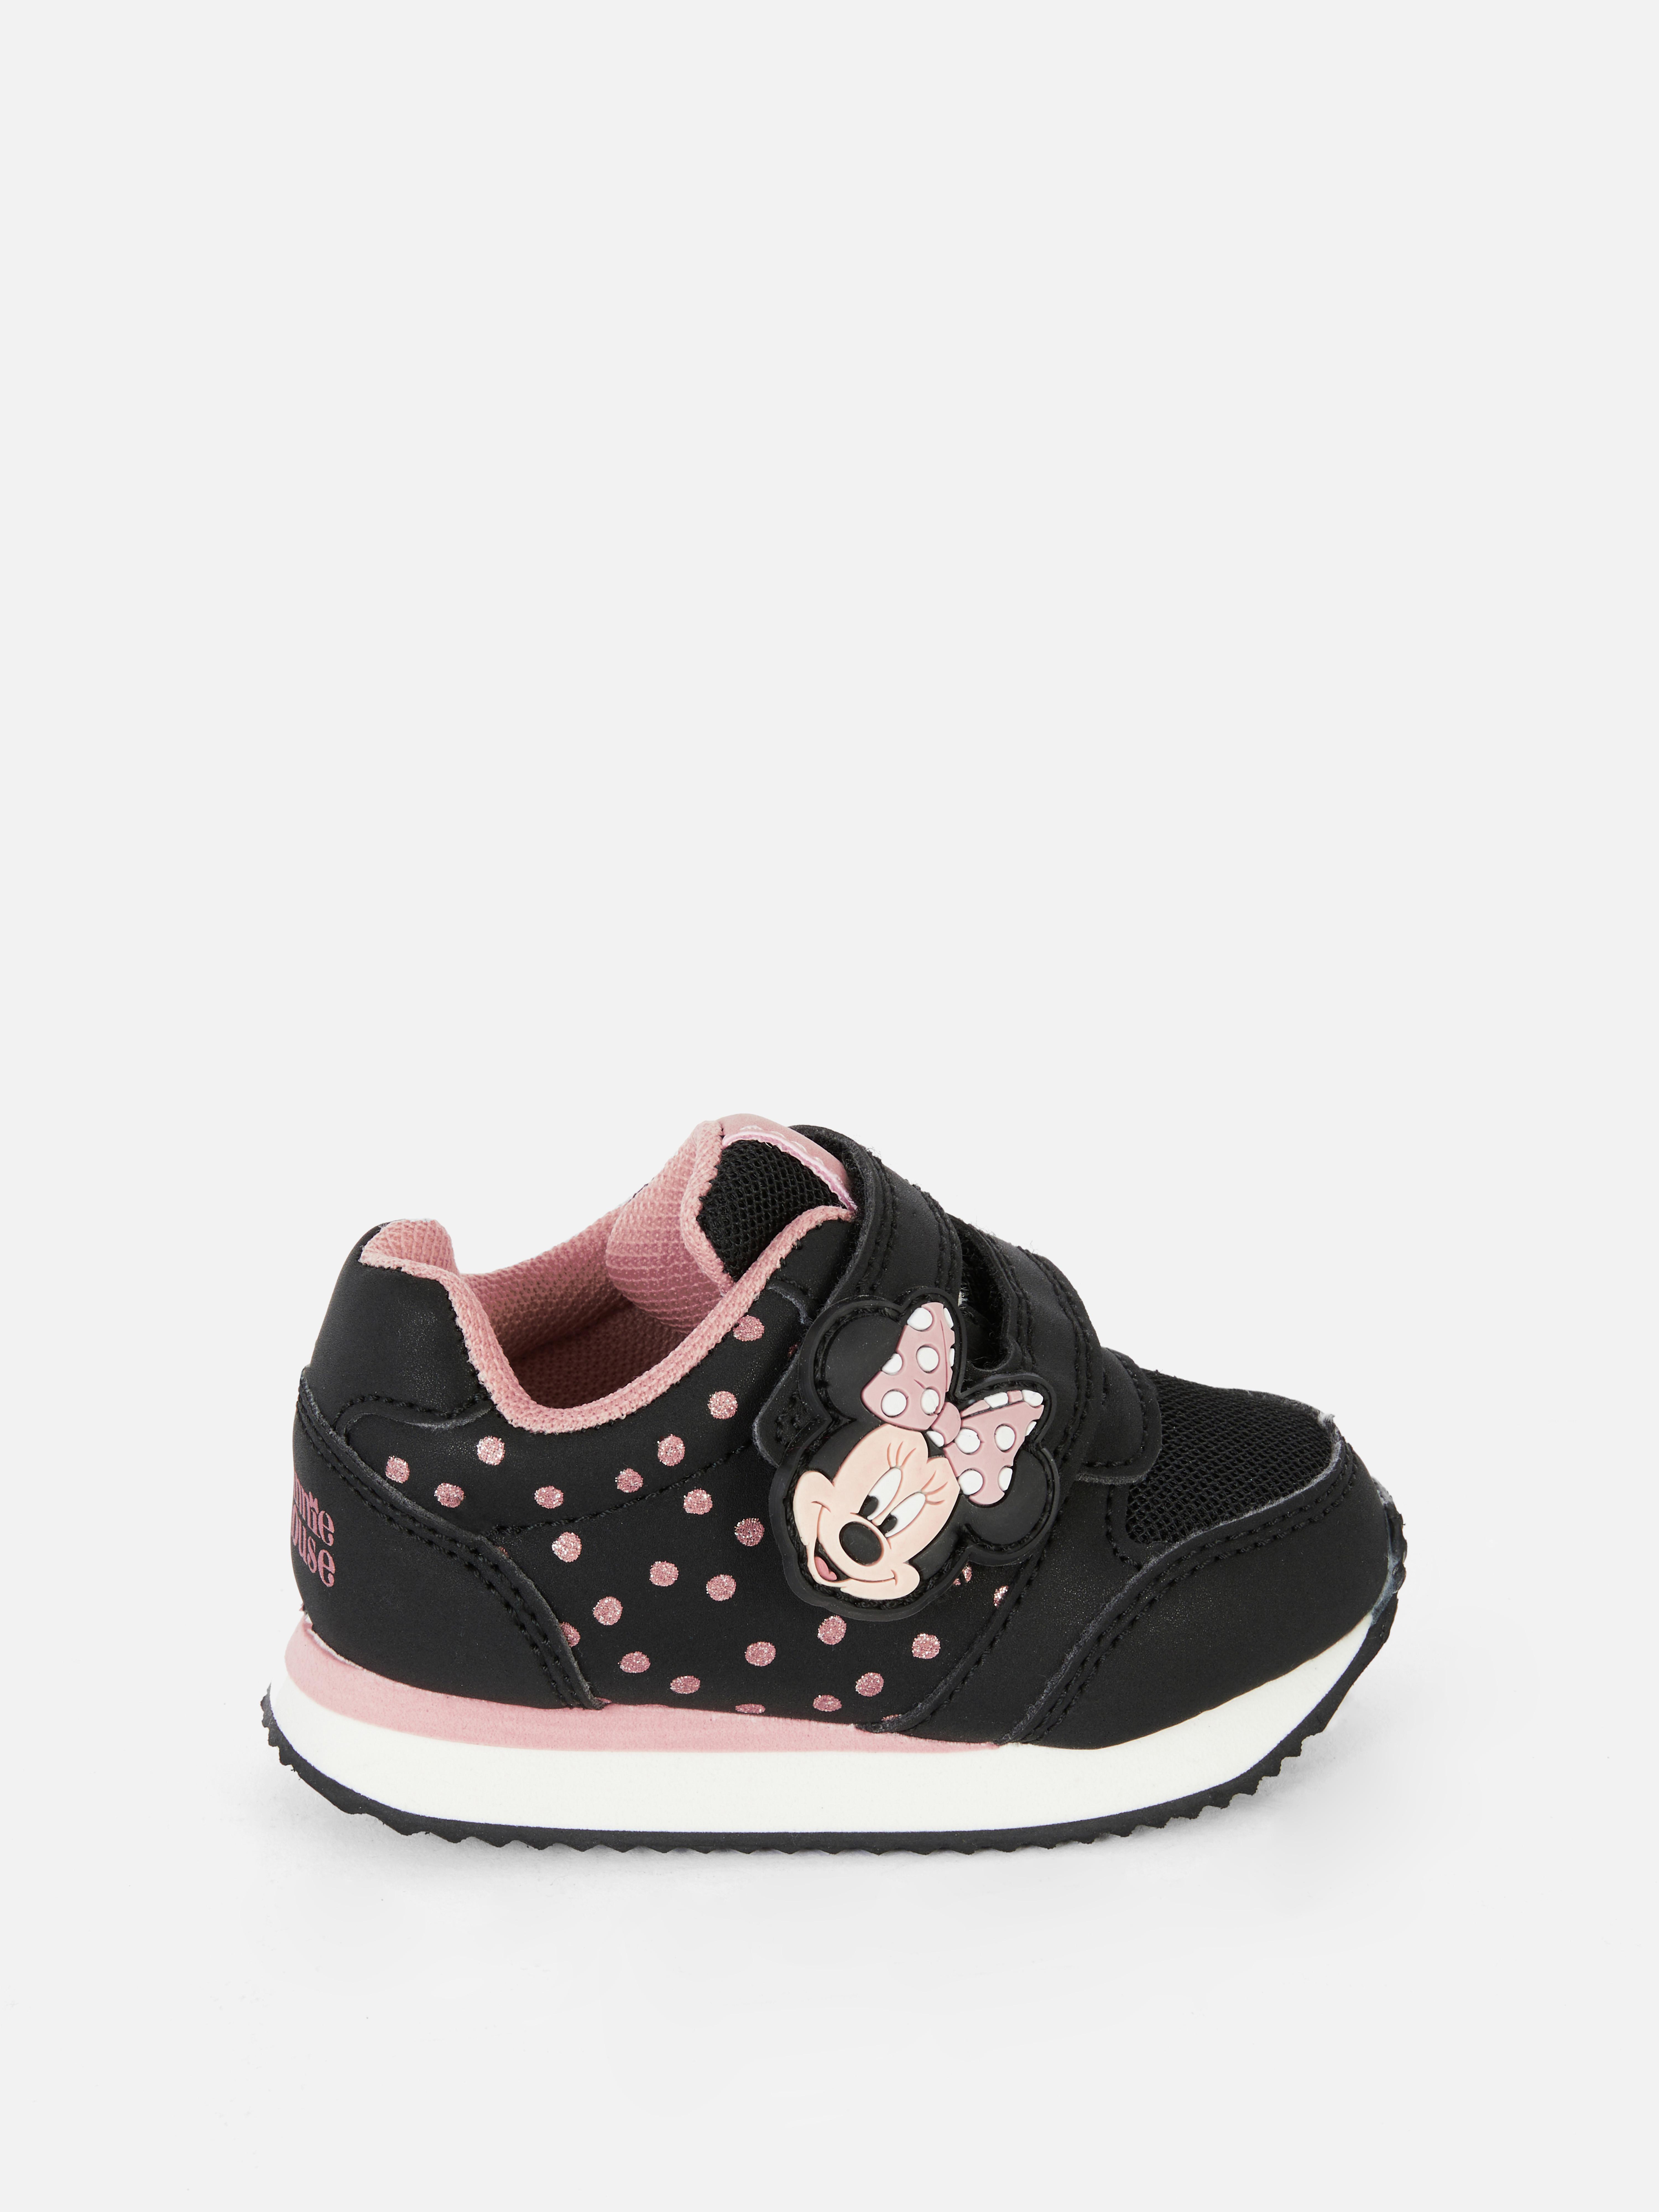 Disney's Minnie Mouse Trainers